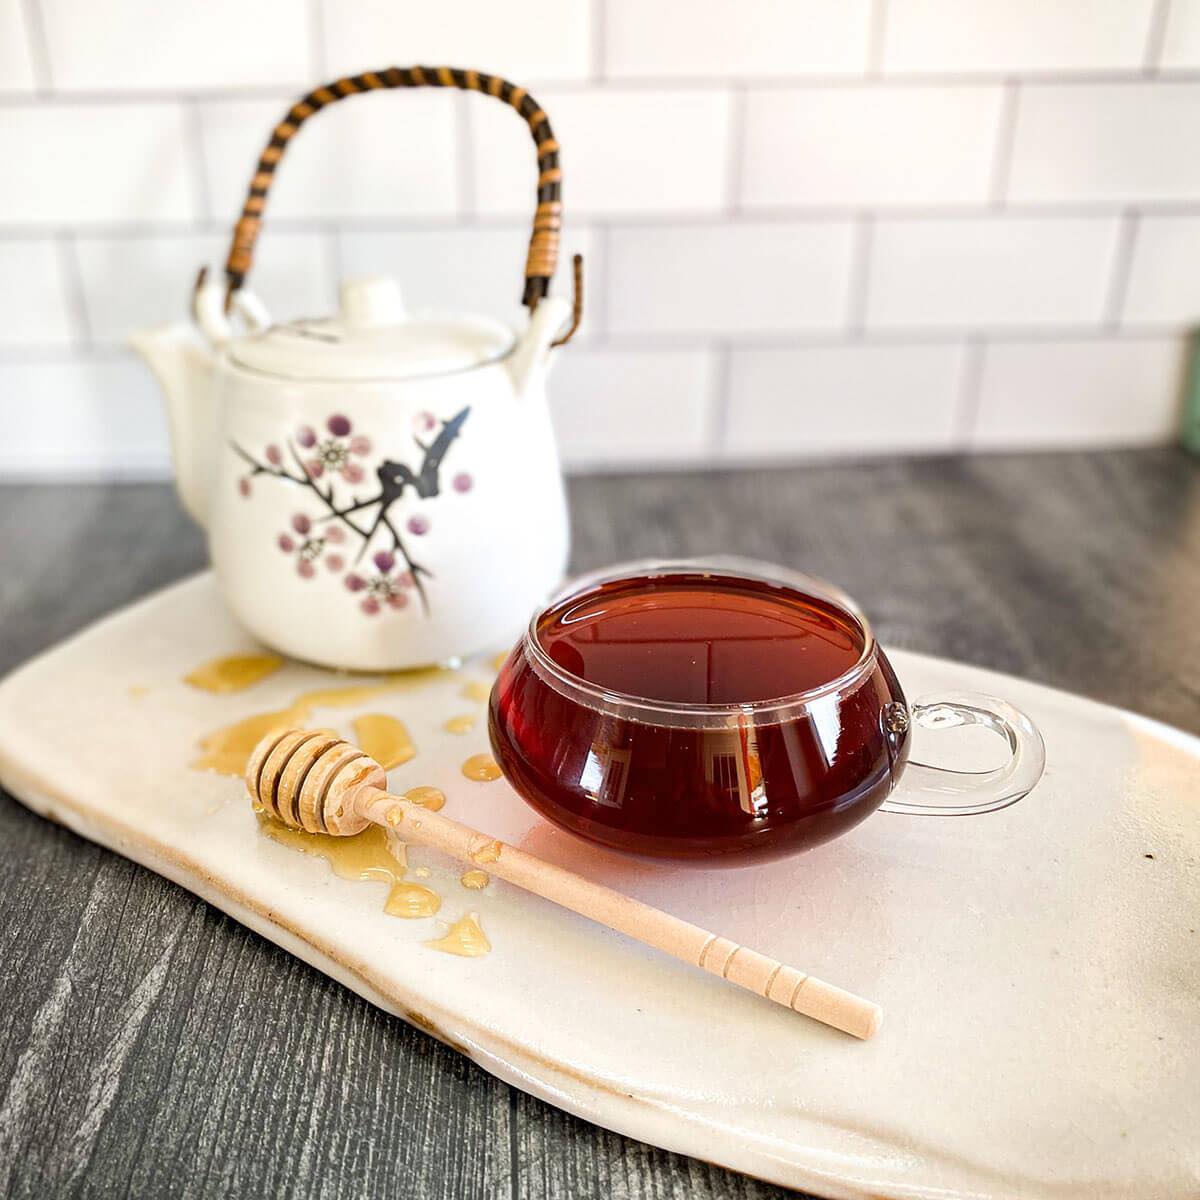 A brewed cup of Creamy Pumpkin Pie tea rests on a white ceramic surface with a honey wand and white tea pot.